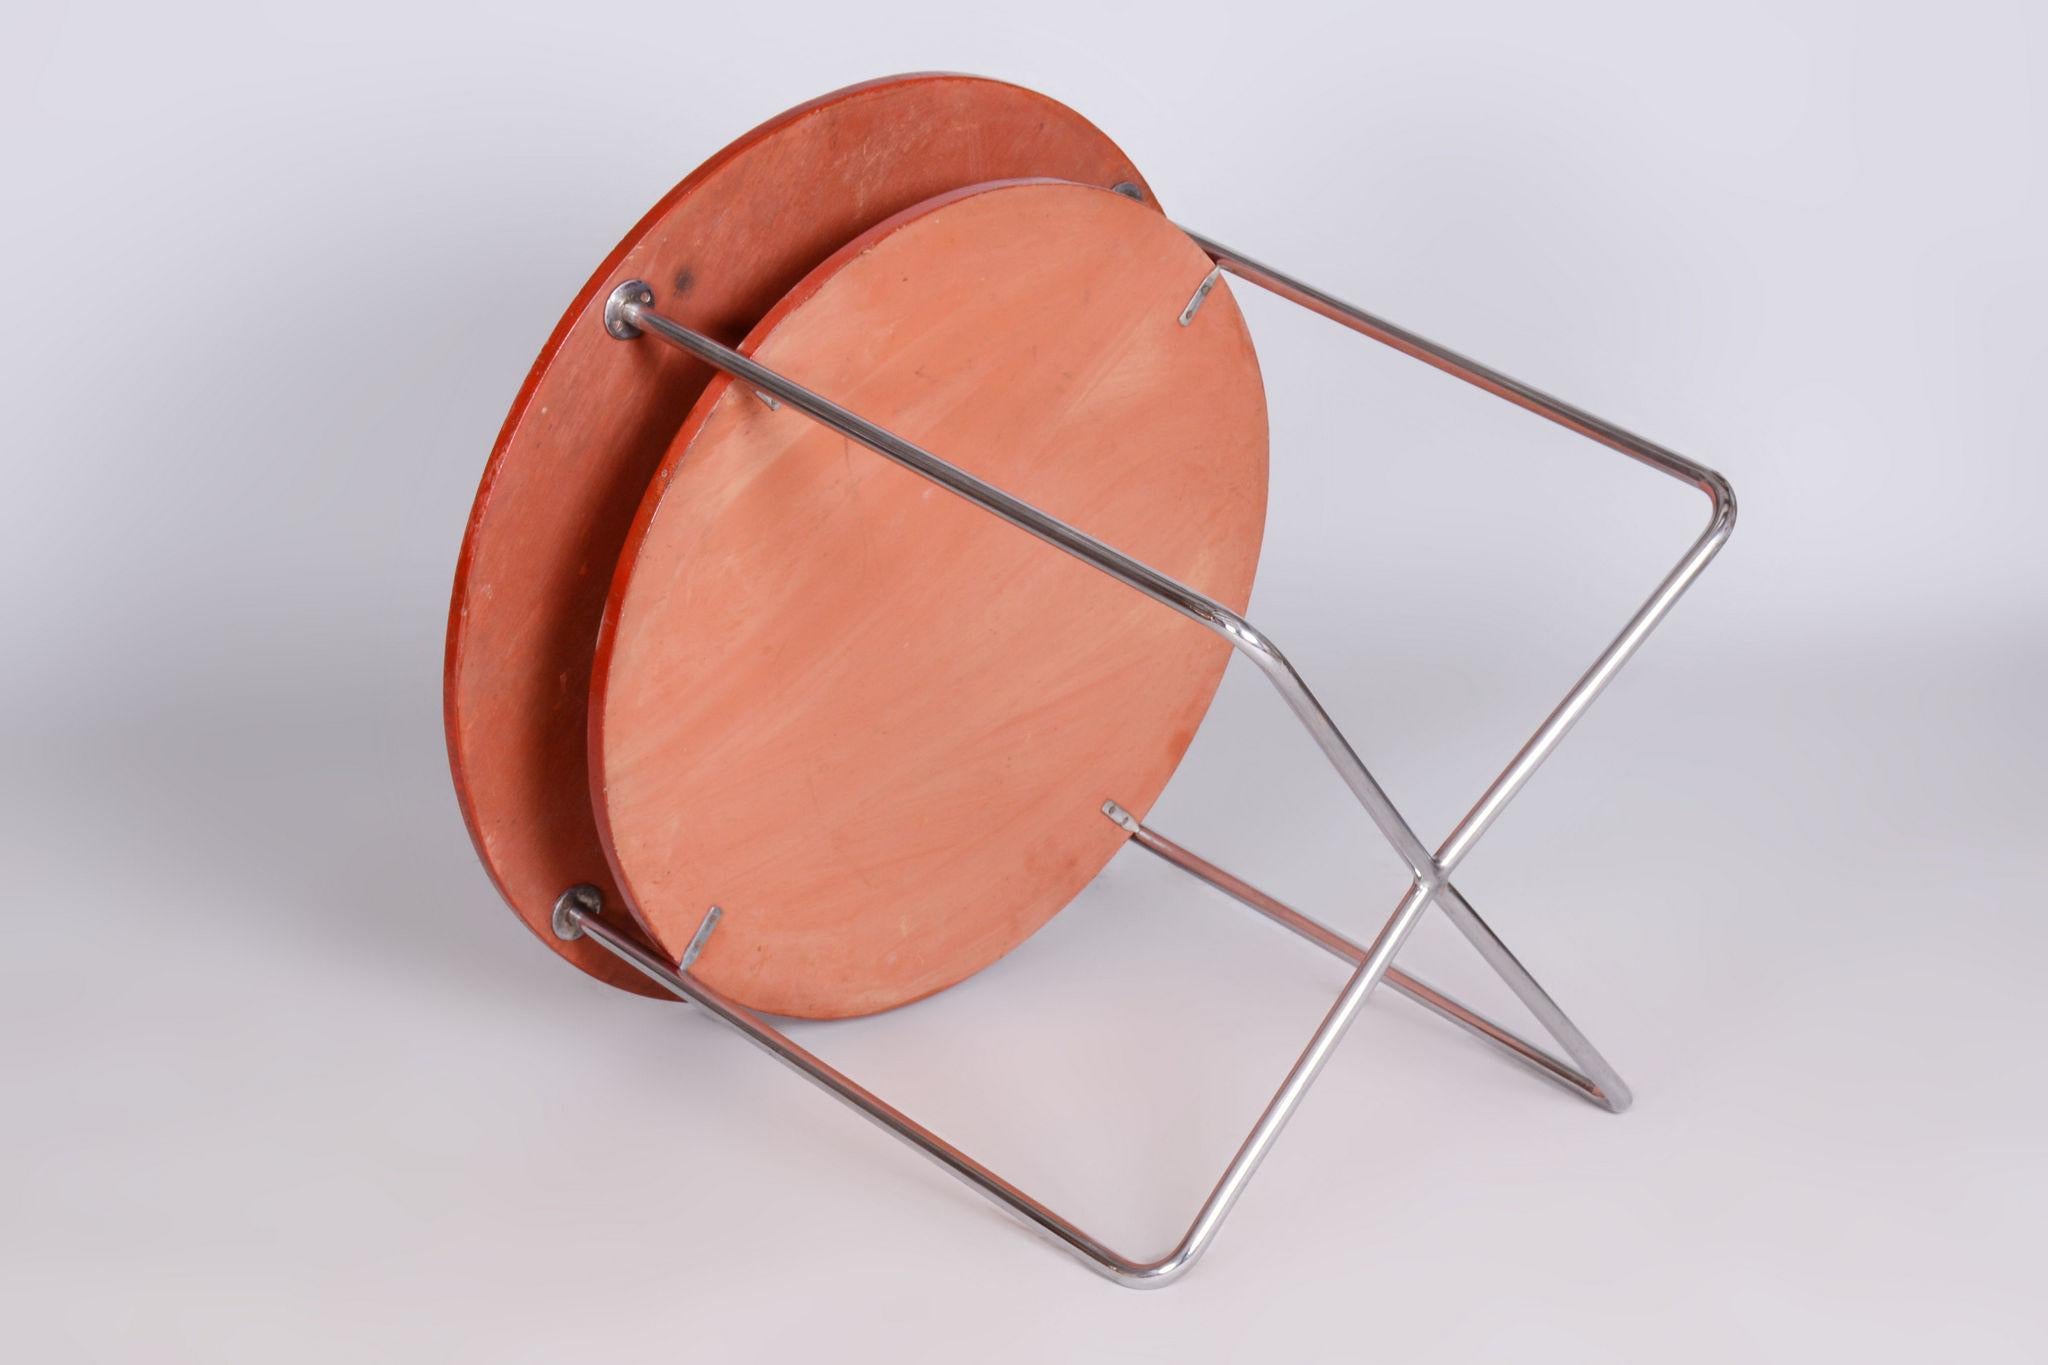 Mid-20th Century Restored Bauhaus Small Round Table, Chrome-Plated Steel, Czechia, 1930s For Sale